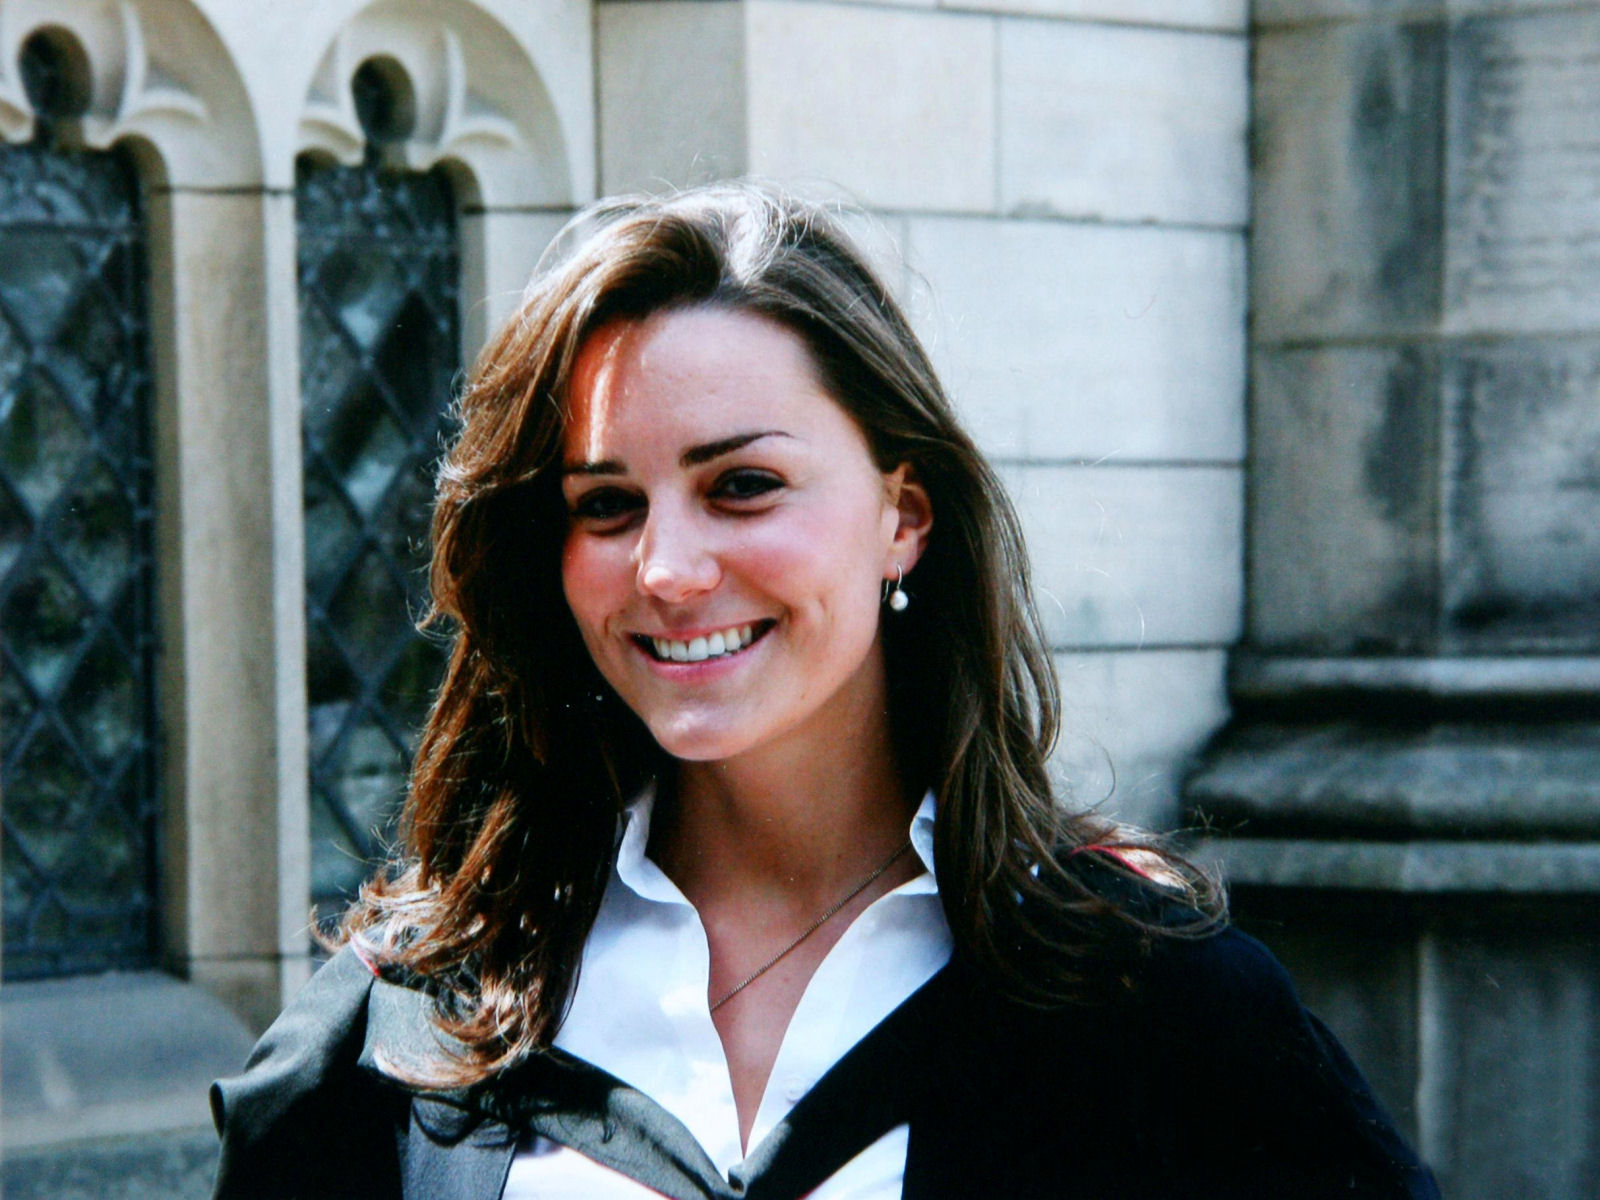 Kate Middleton Wallpaper |Clickandseeworld is all about Funny|Amazing|pictures ...